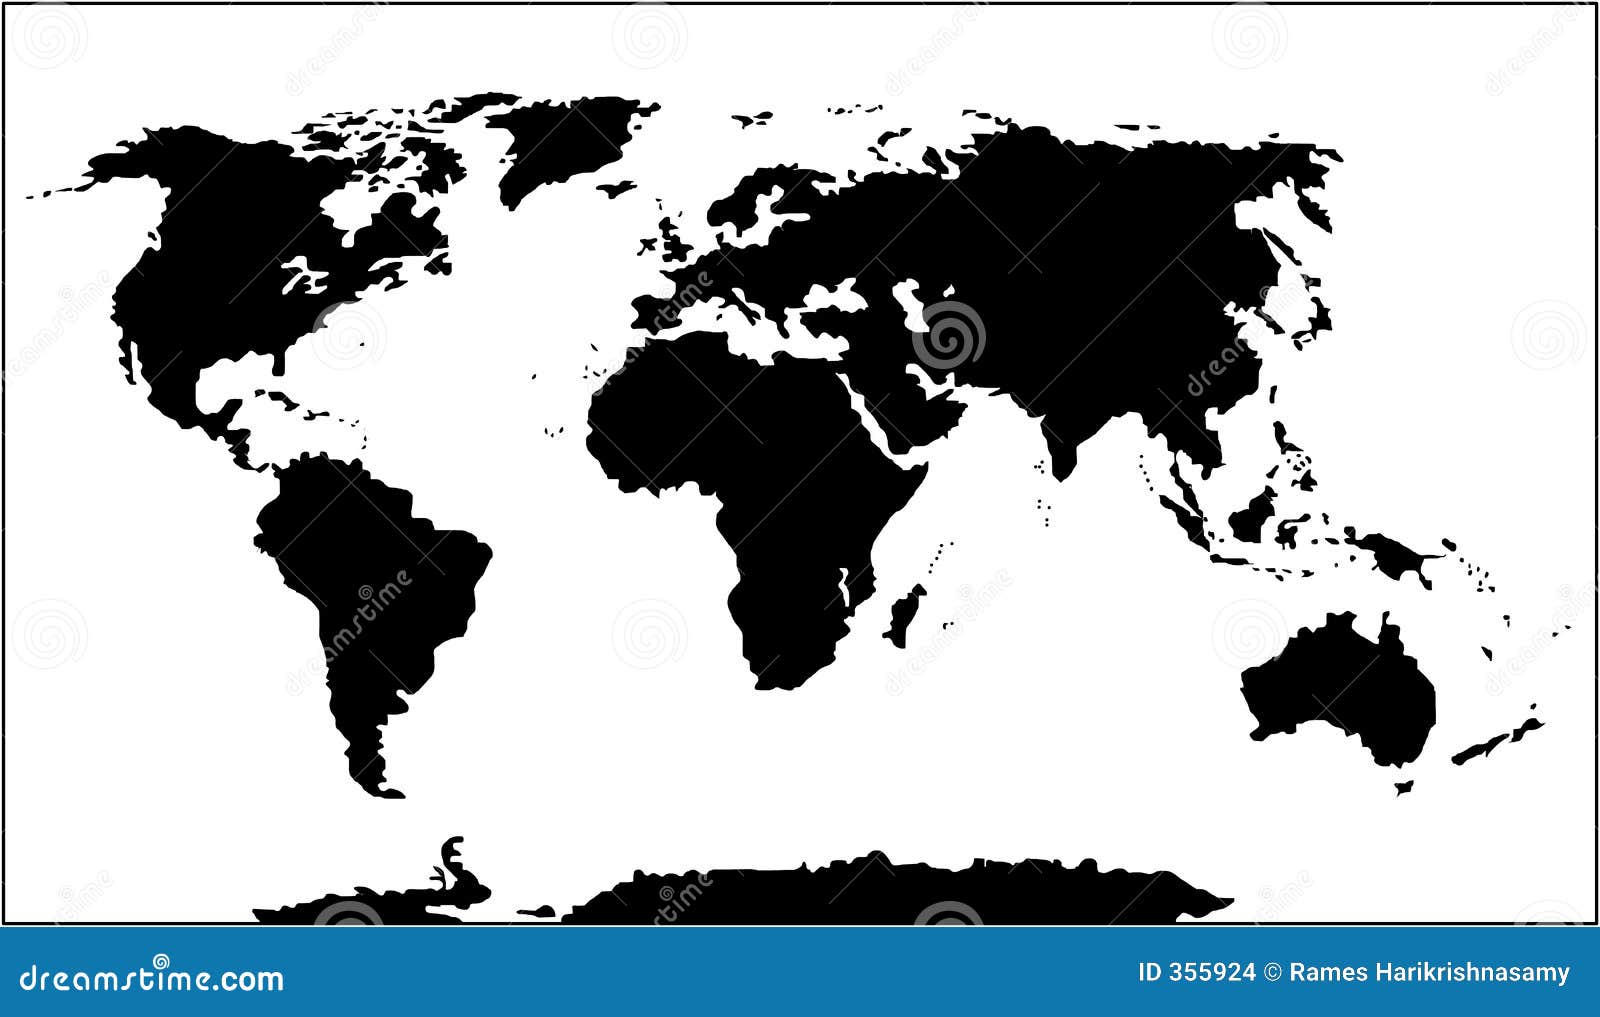  - world map (black and white)